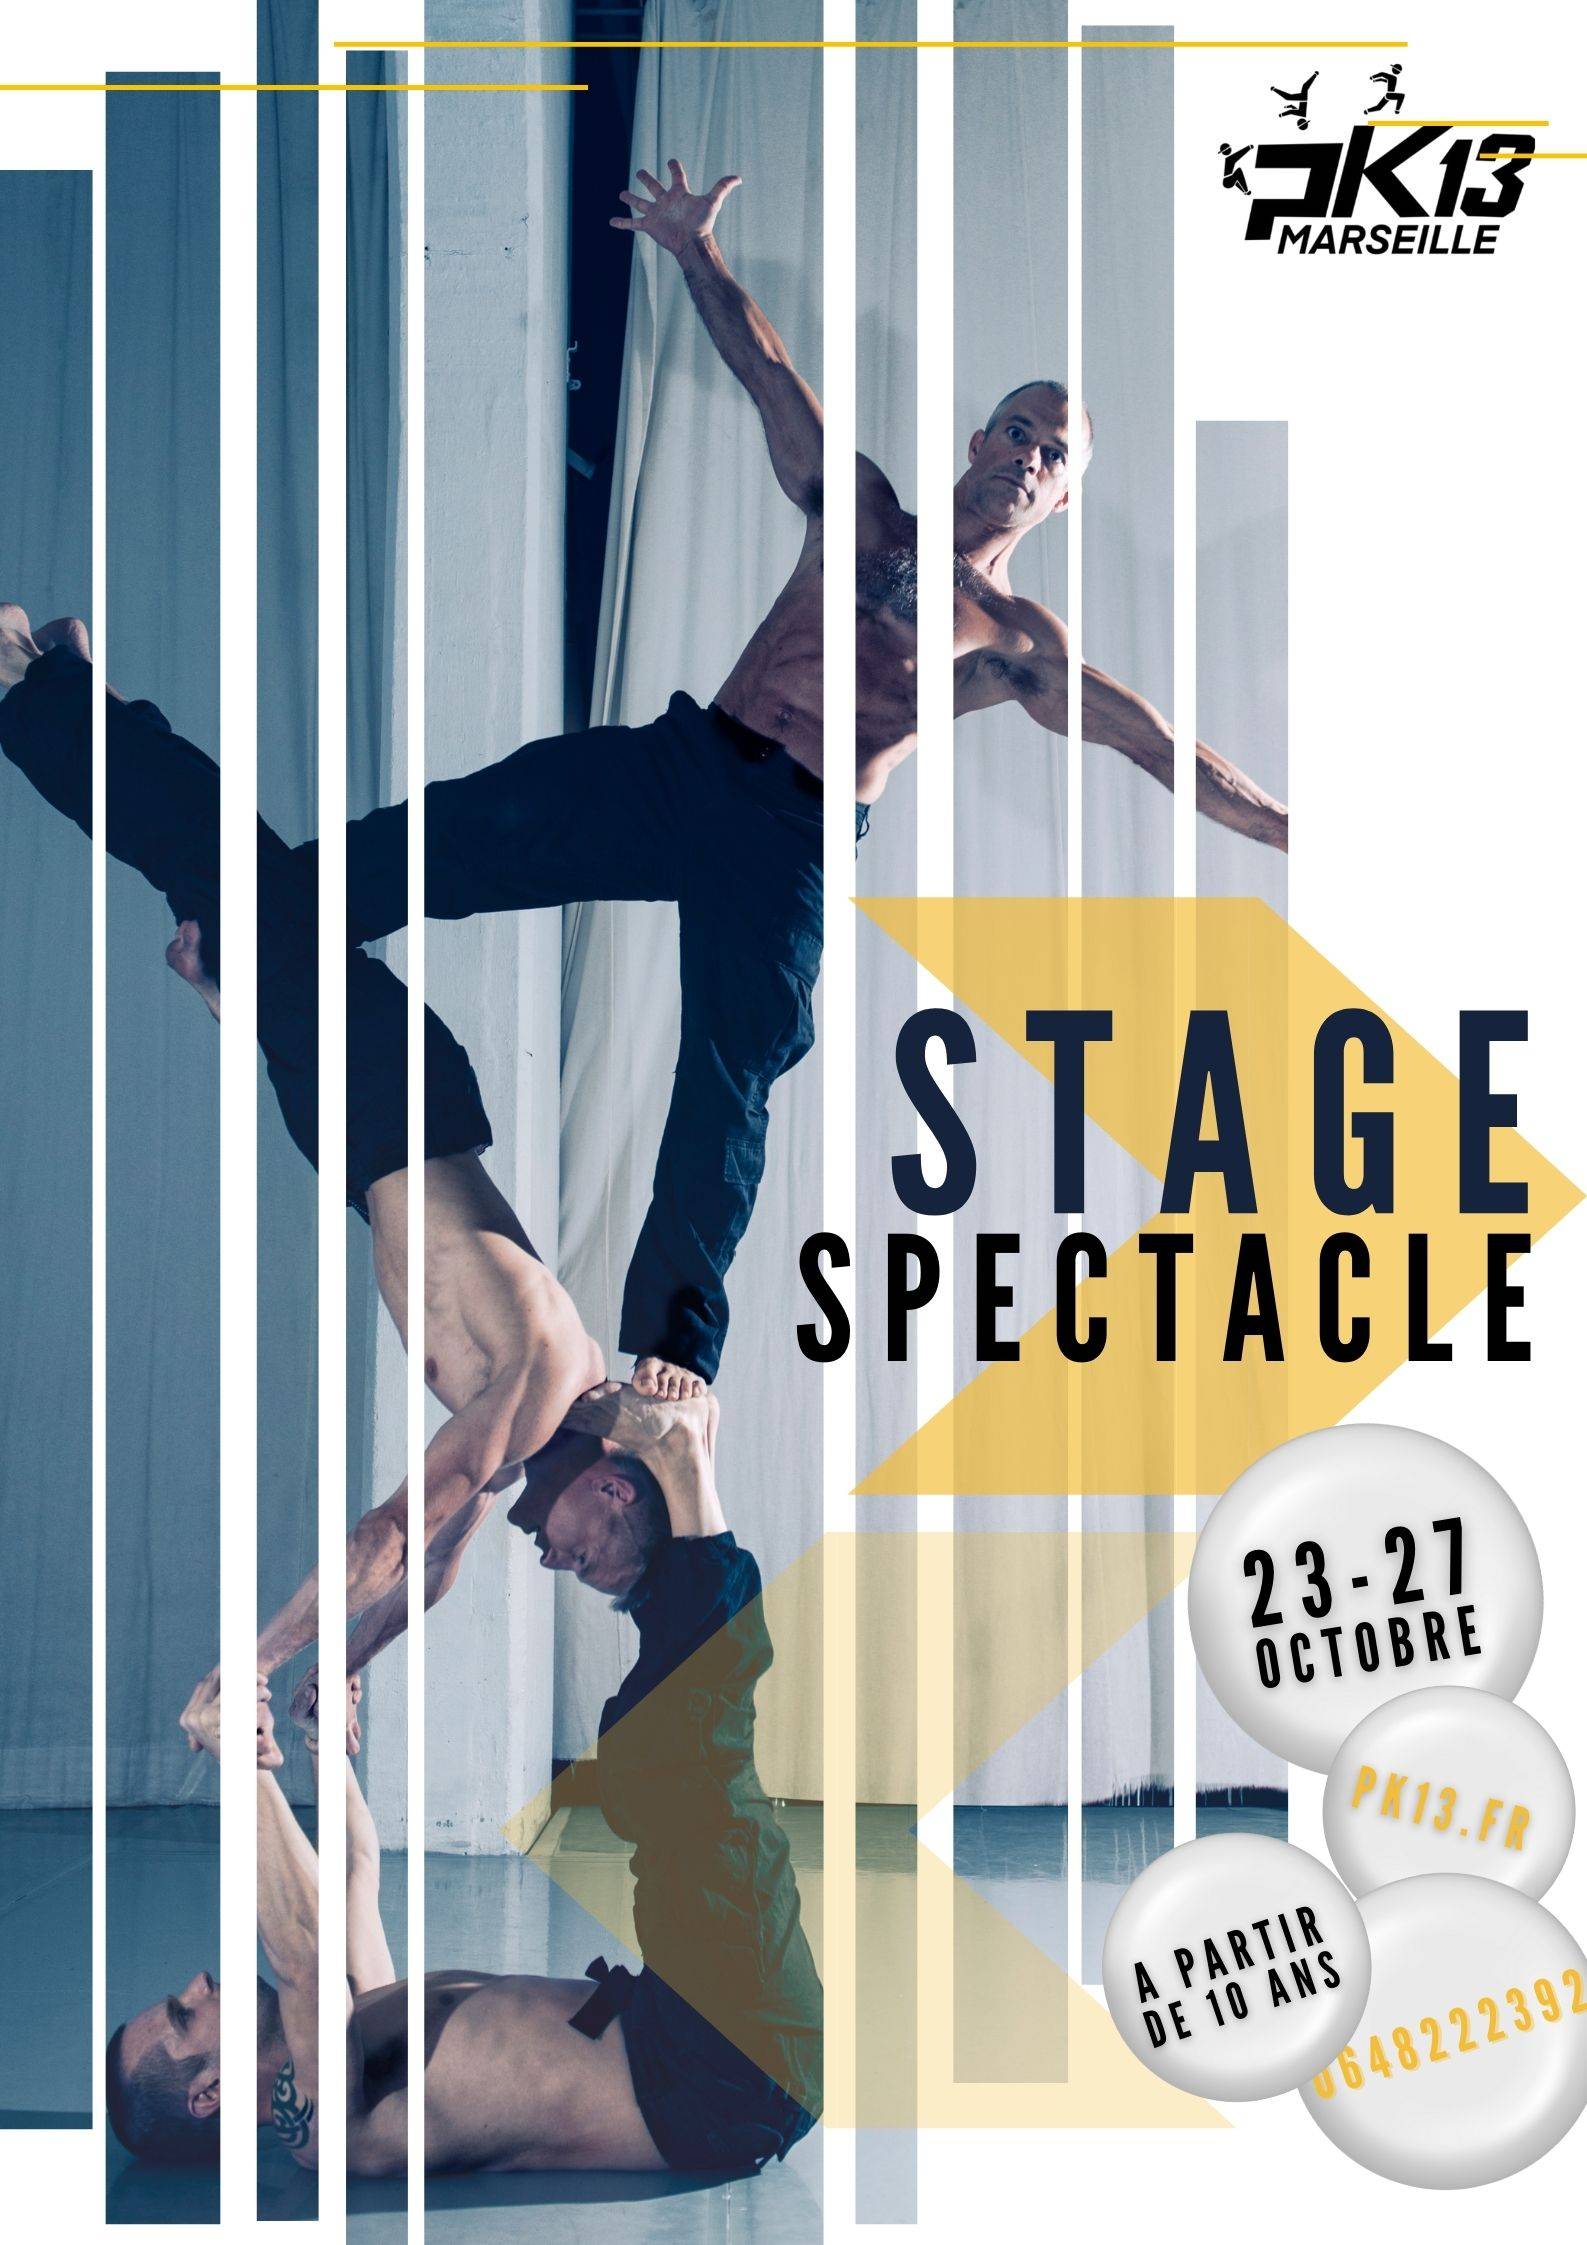 2) Stage Toussaint "spectacle" 